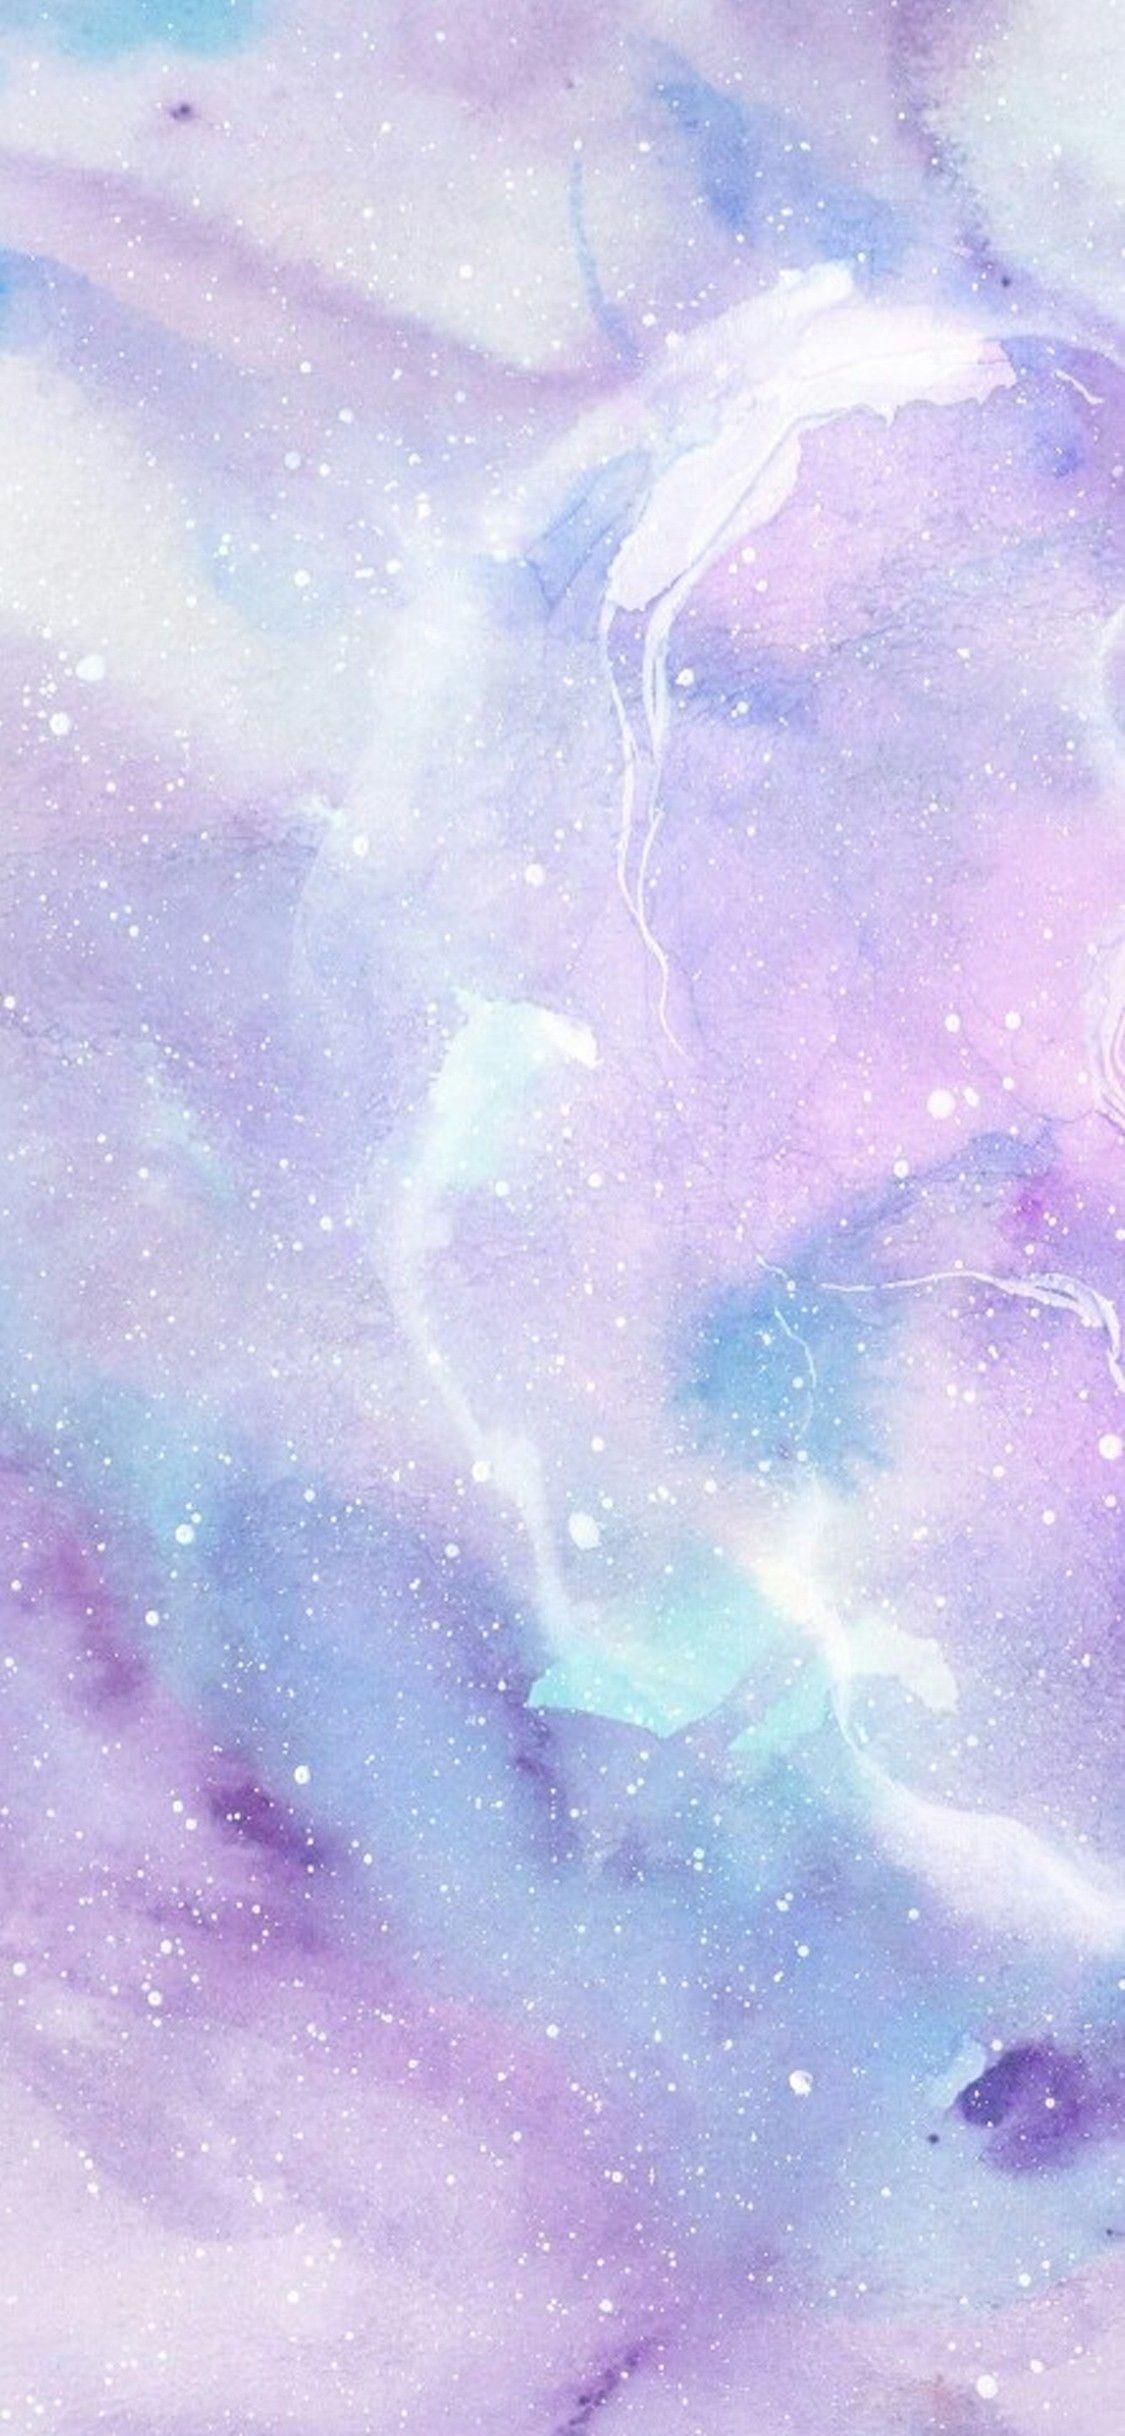 Pastel galaxy wallpaper for your phone or desktop background. - Pastel